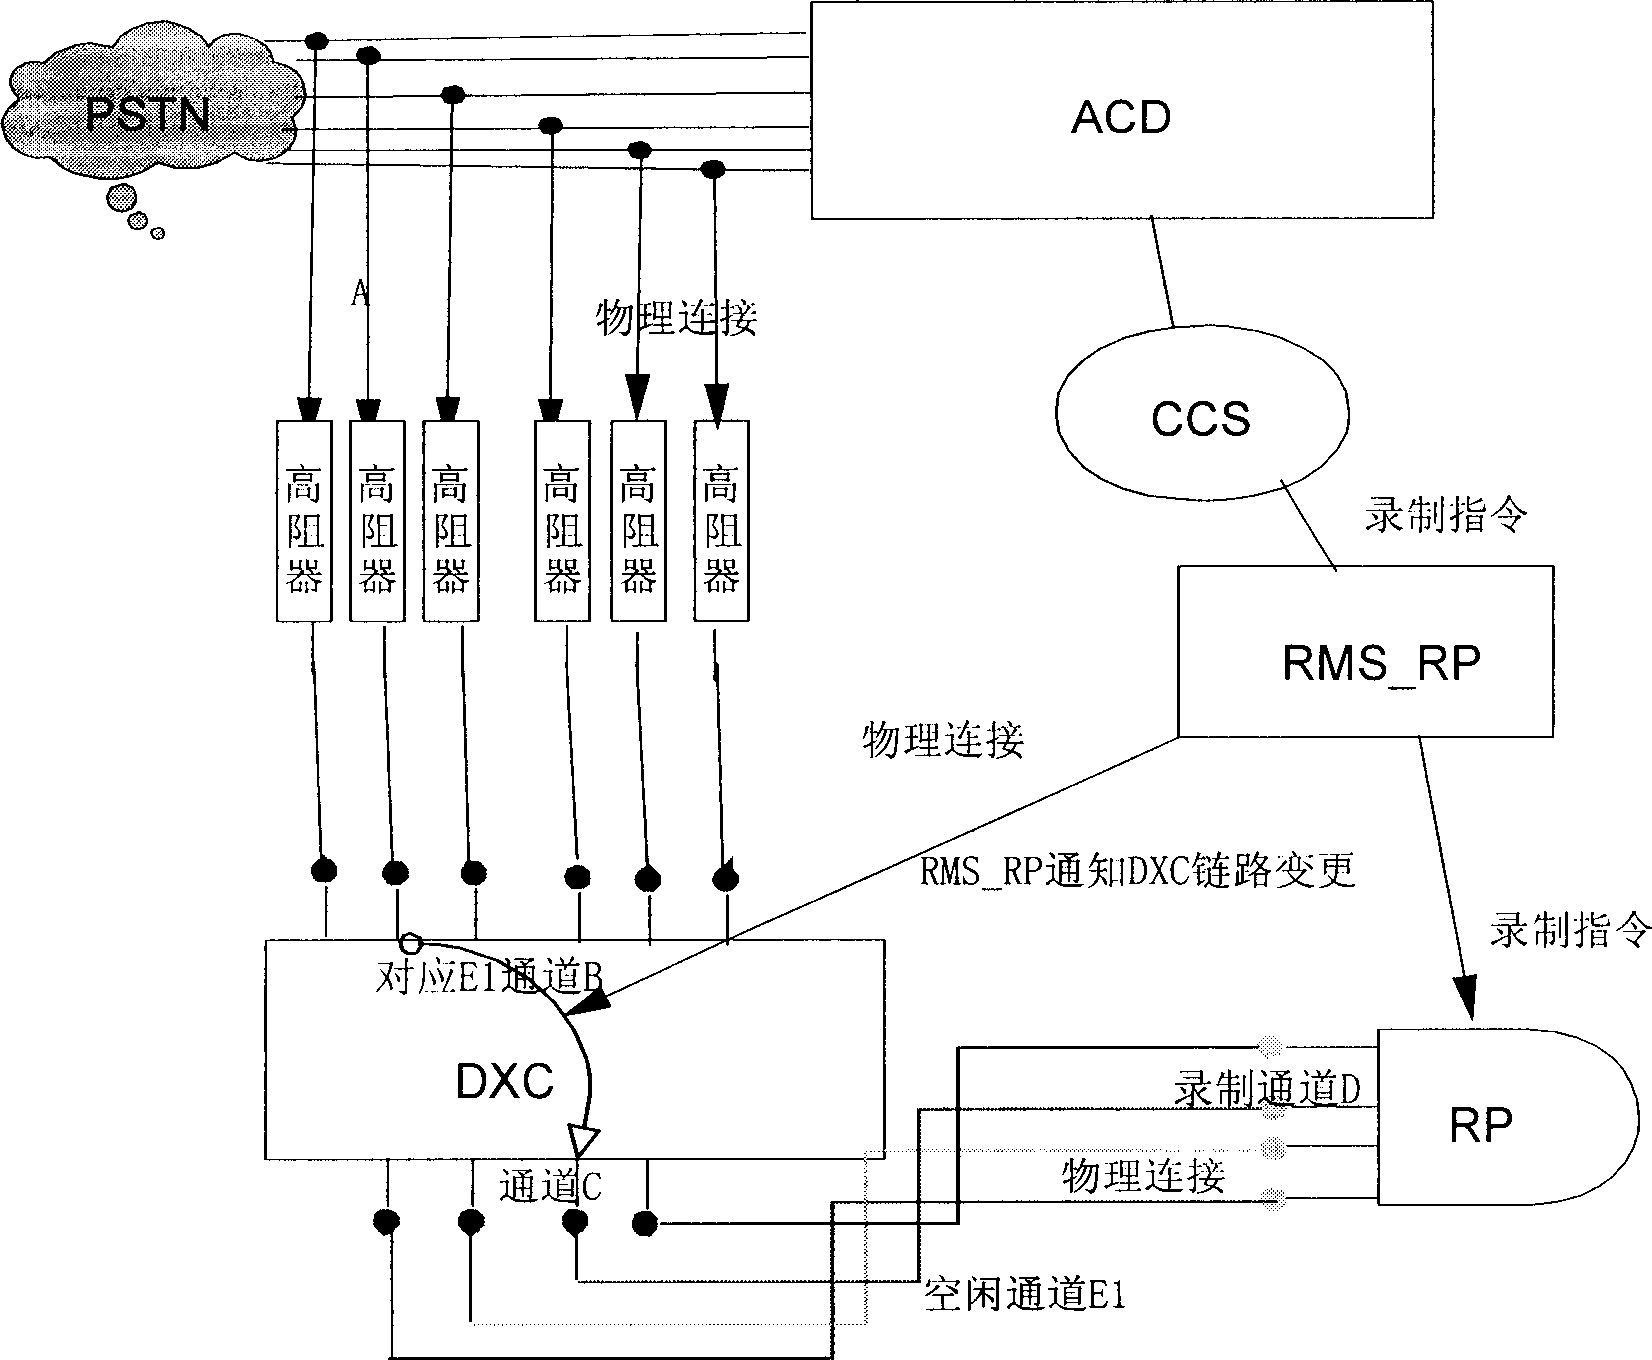 Method for recording call voice between position and user